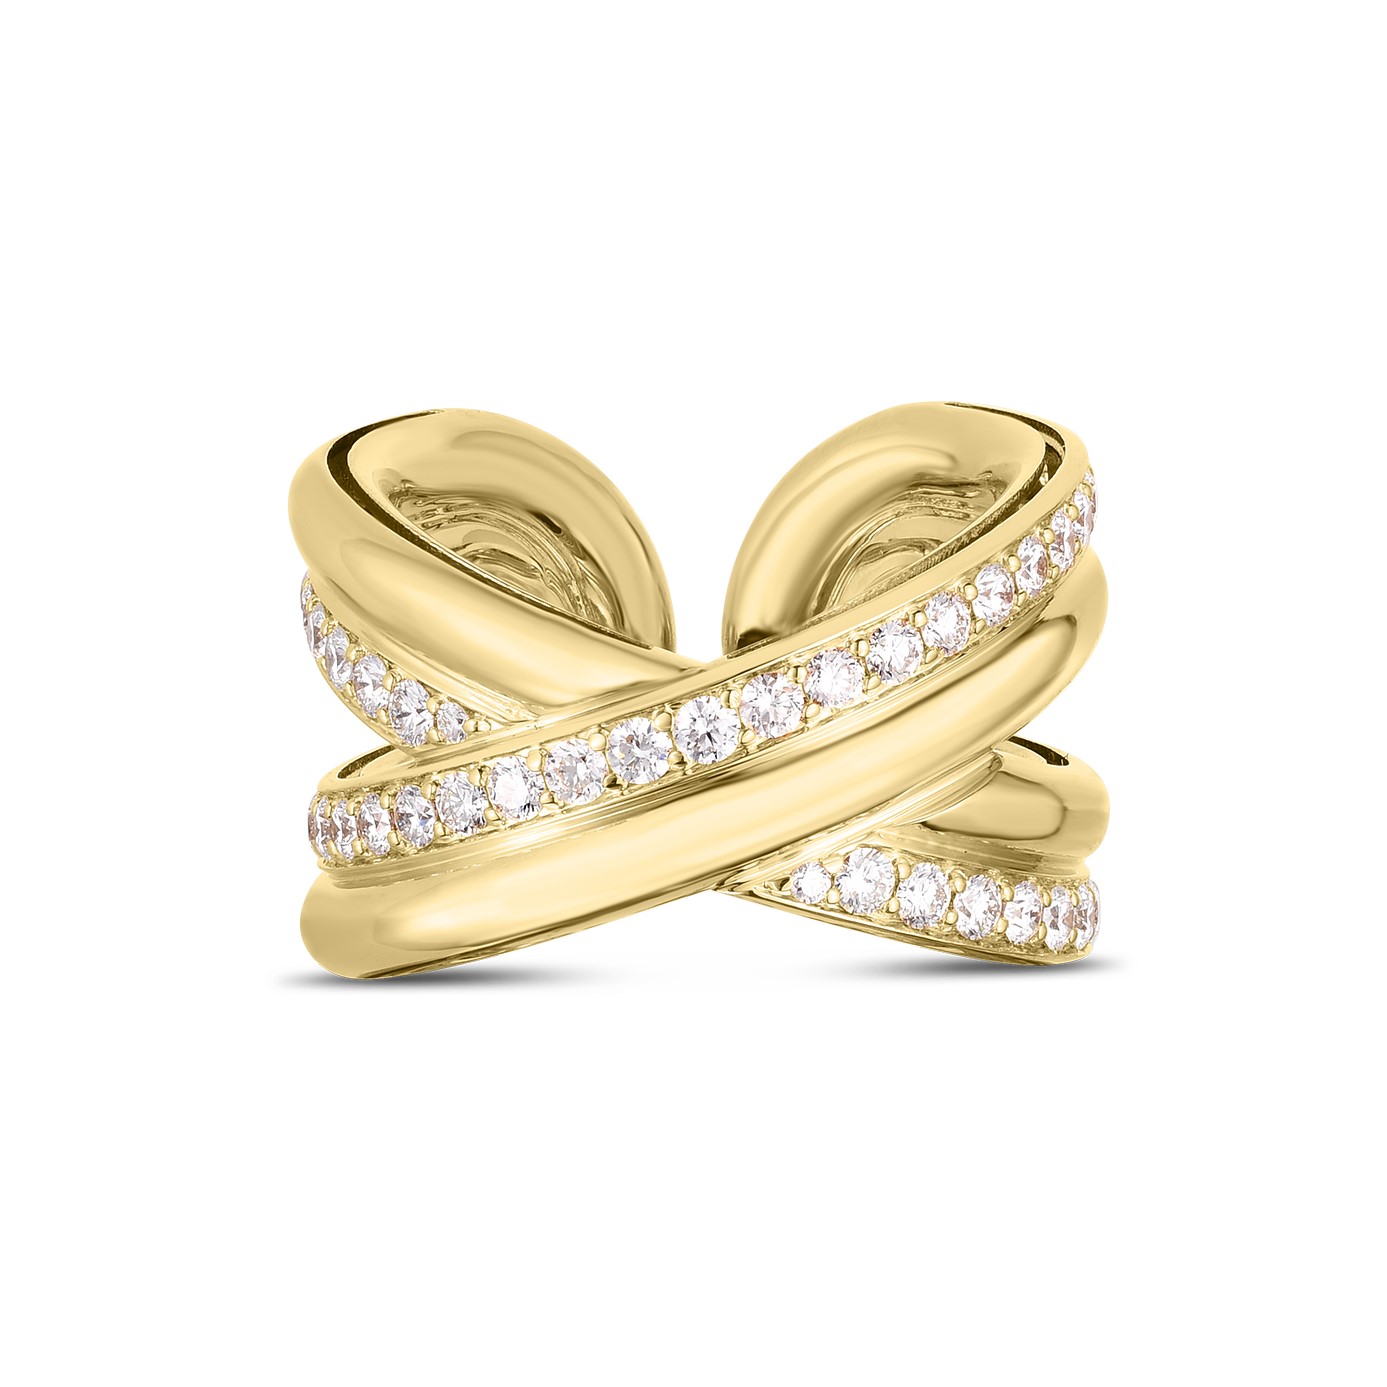 Roberto Coin 18K Yellow Gold Diamond Cialoma Wide Crossover Ring with Round Brilliant Cut Diamonds 0.90 TCW G-H SI